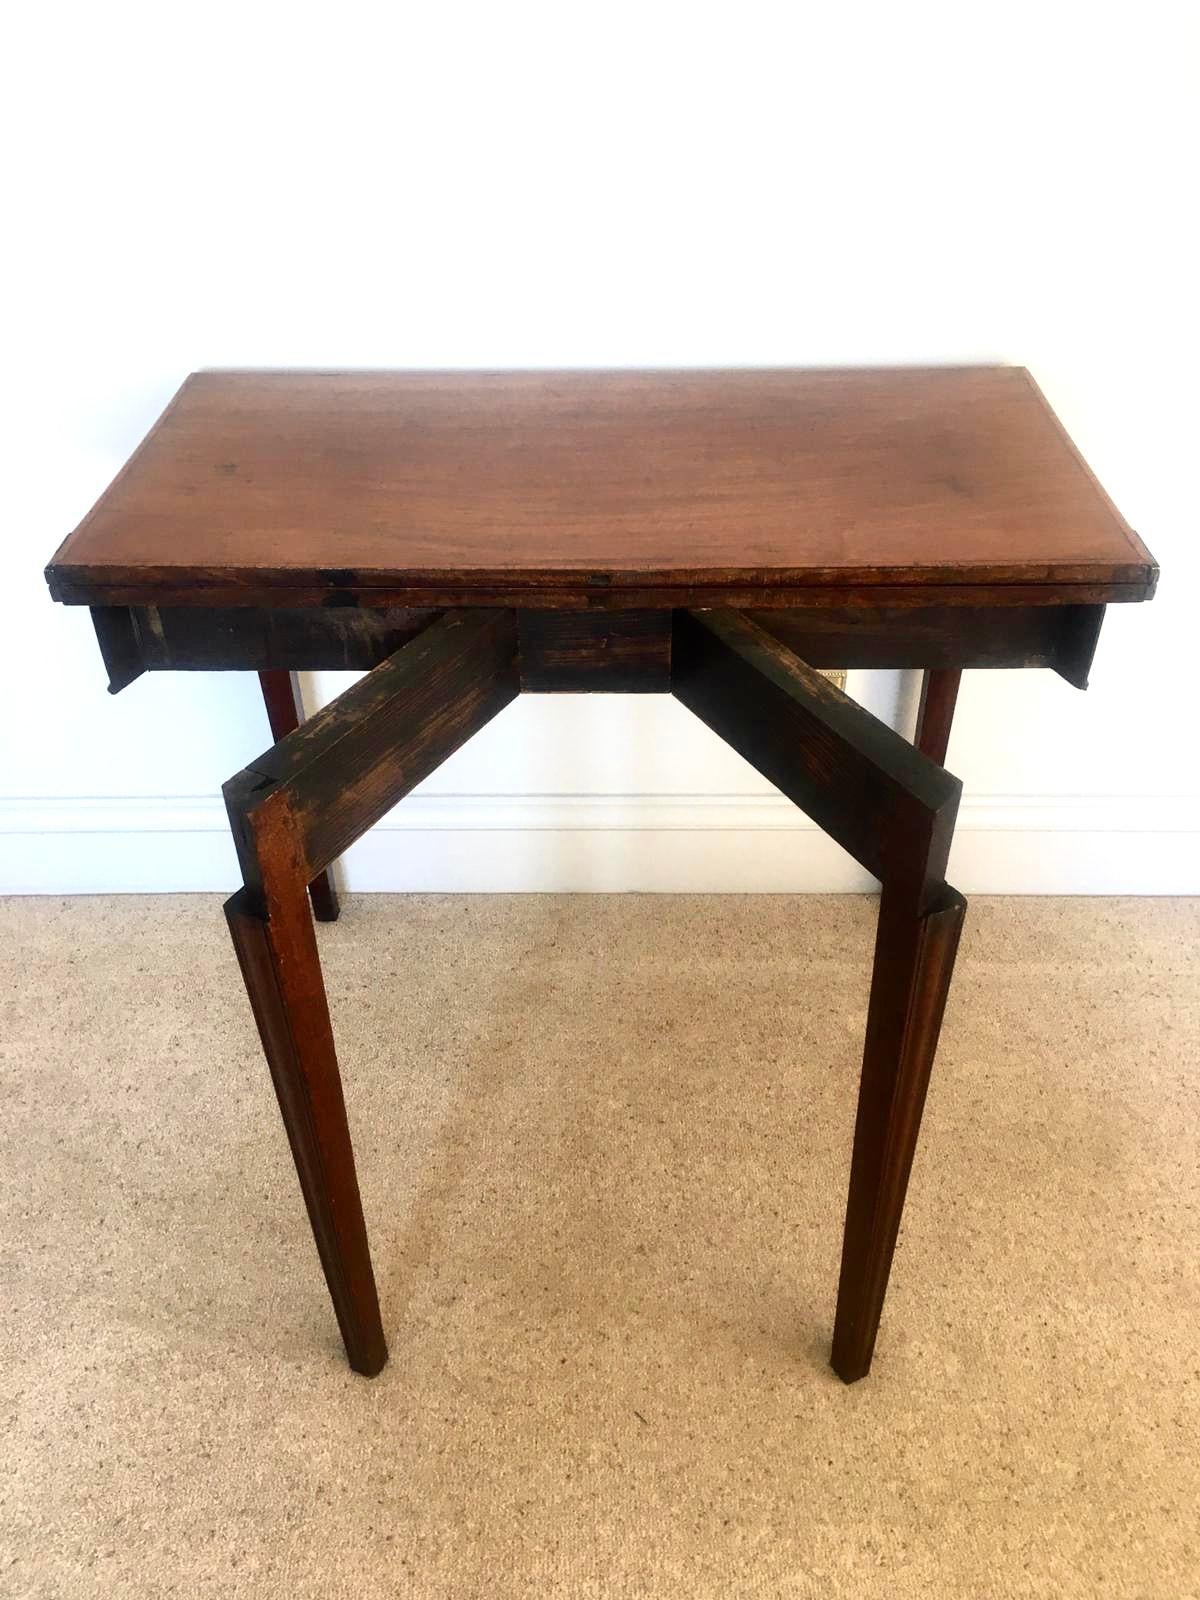 Antique 18th century George III mahogany inlaid tea table having a quality mahogany lift up top crossbanded in satinwood which opens to reveal a polished figured mahogany inside crossbanded in satinwood, mahogany frieze also crossbanded in satinwood